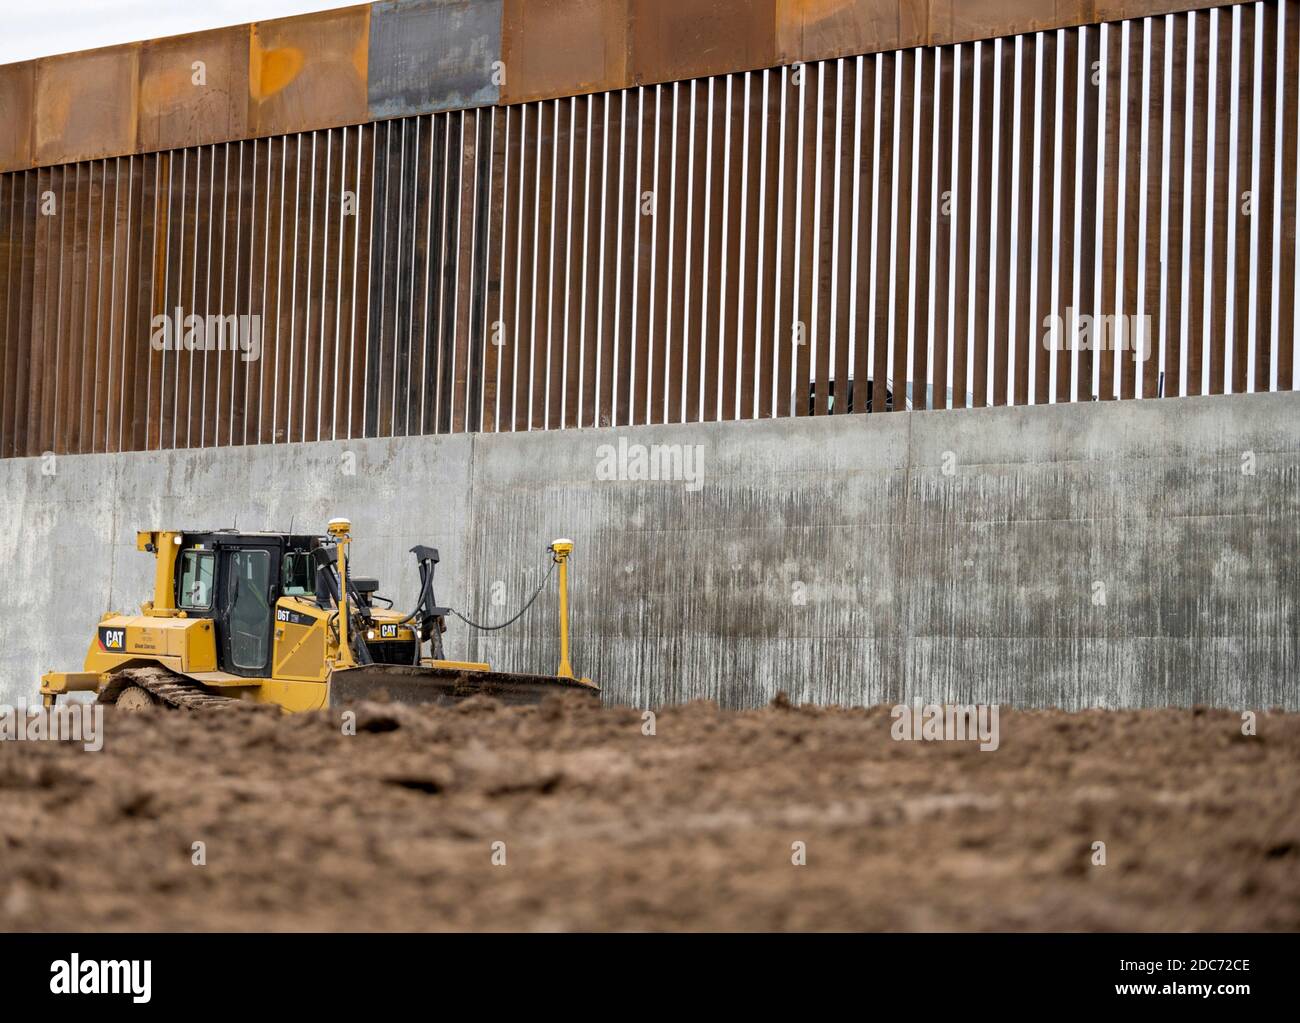 New 30-foot sections of bollard panels are assembled at a build site along the U.S. - Mexican border wall, known at the Trump Wall January 13, 2020 near McAllen, Texas. Stock Photo